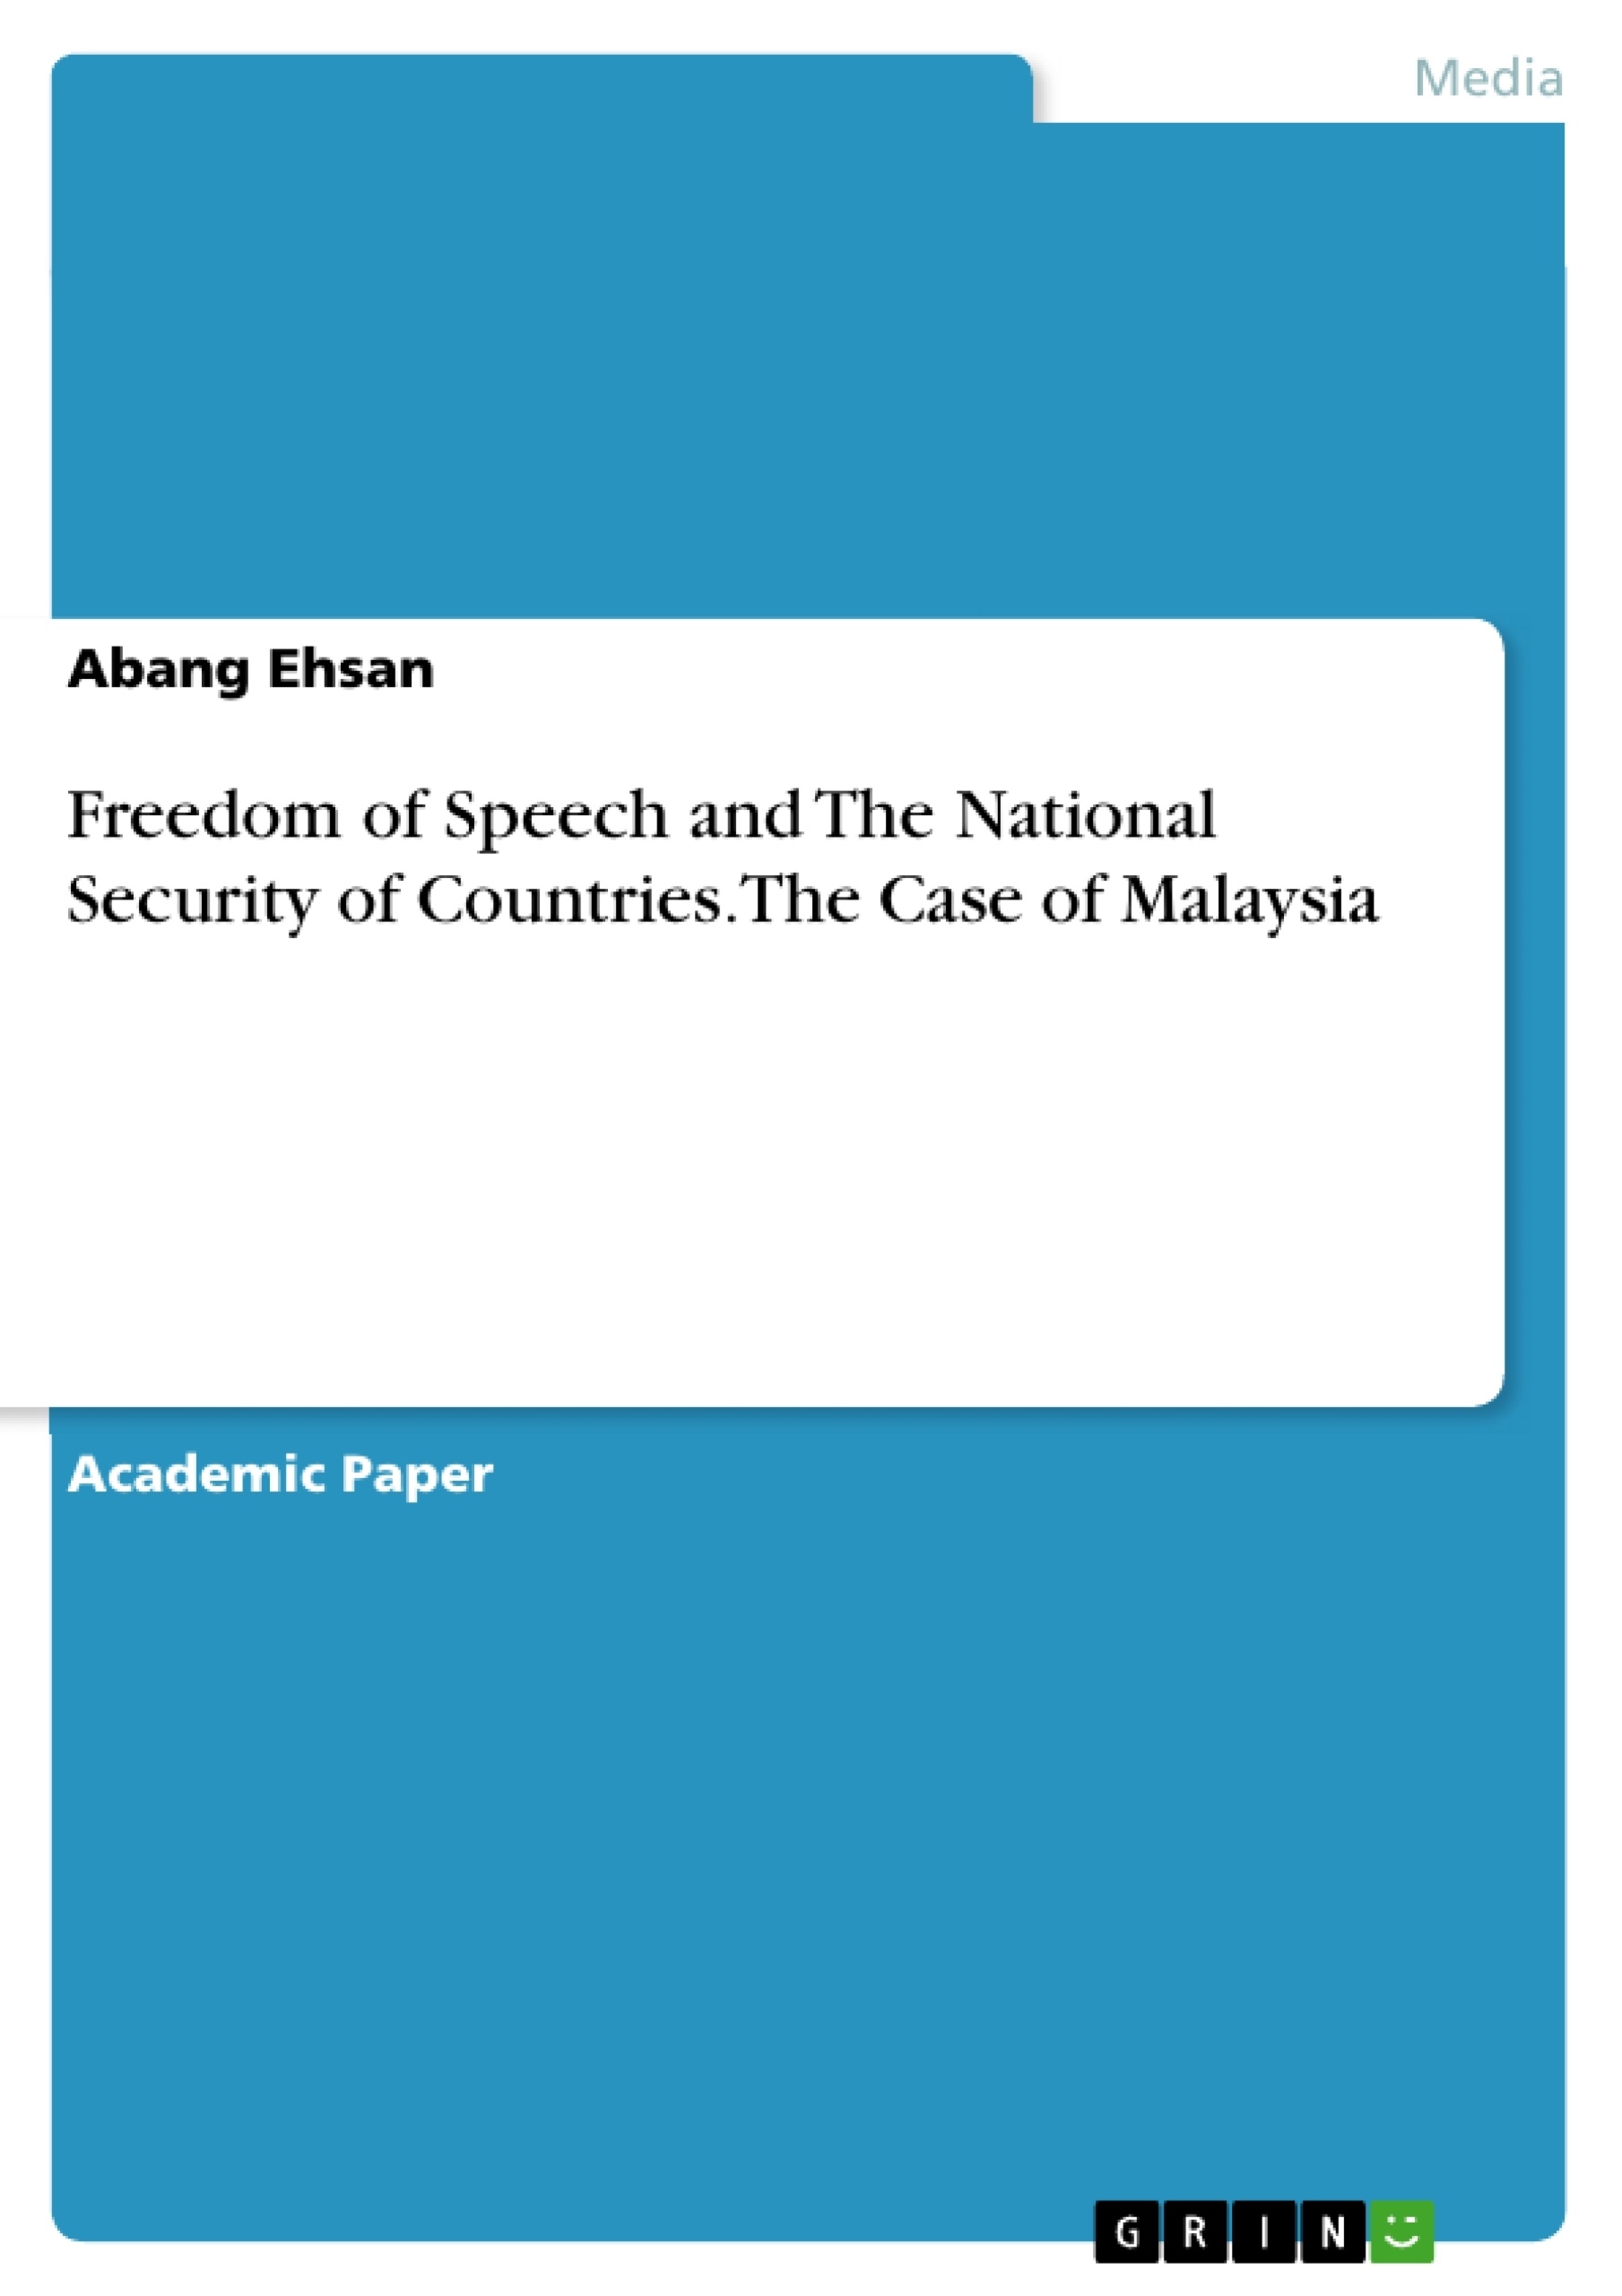 Titre: Freedom of Speech and The National Security of Countries. The Case of Malaysia